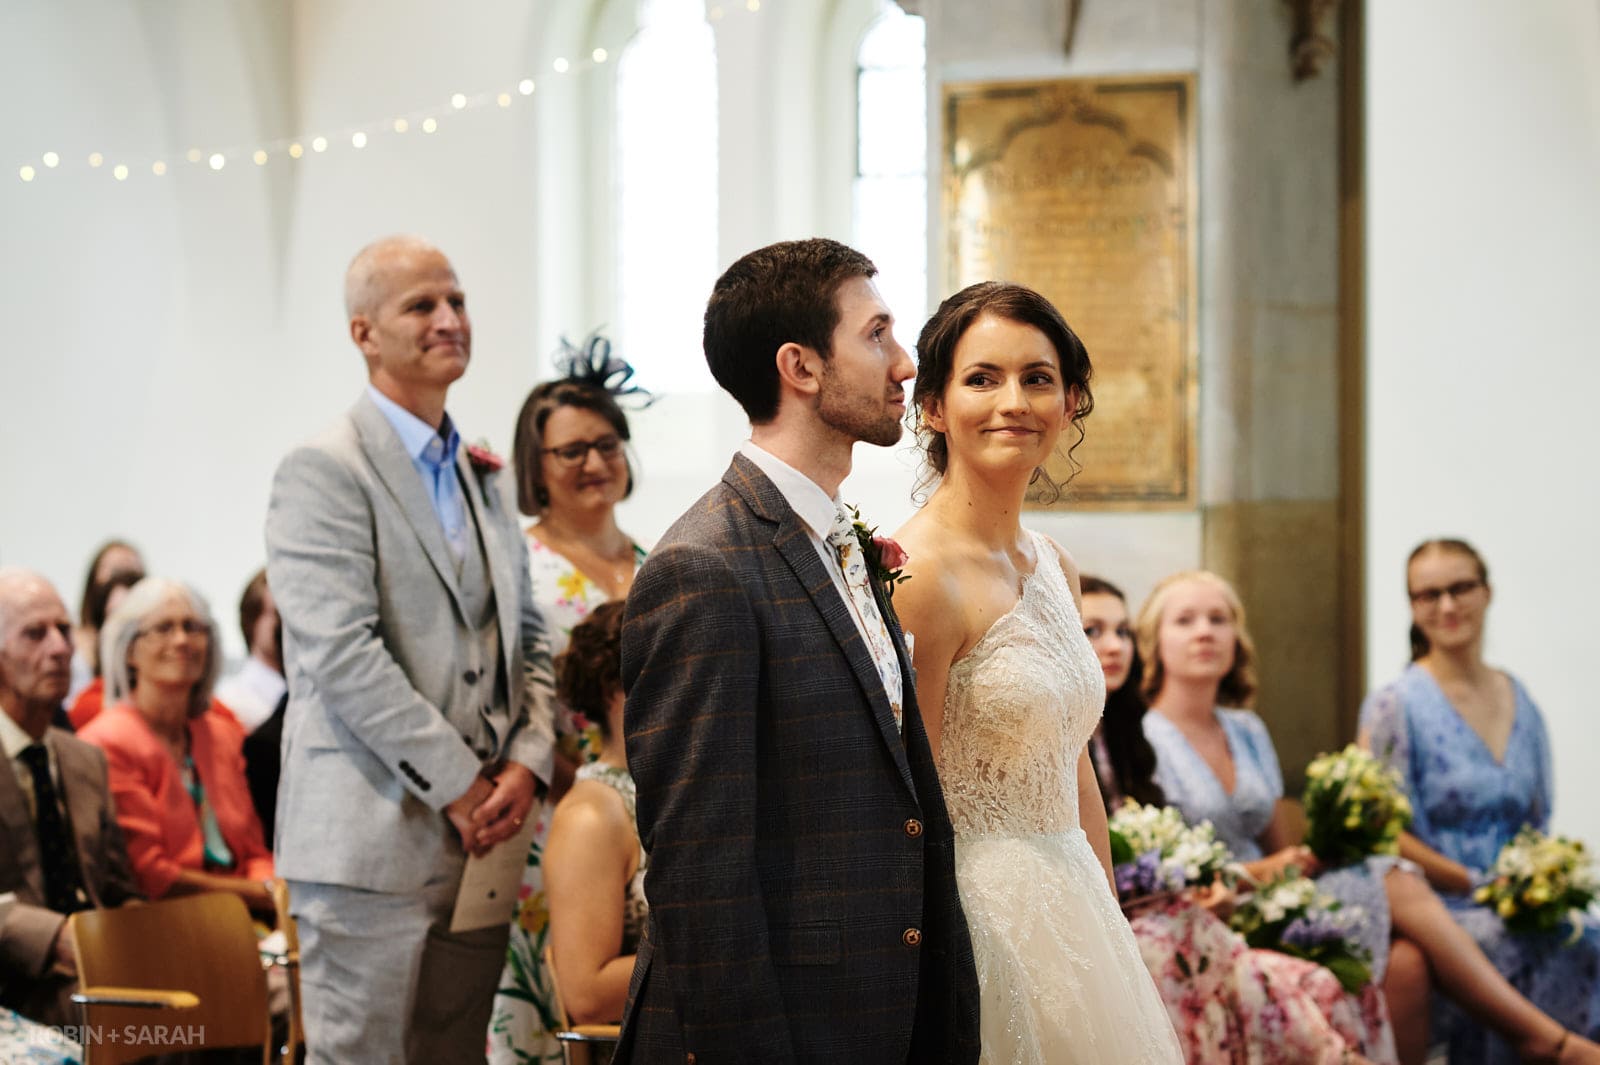 Bride smiles at groom during church wedding ceremony